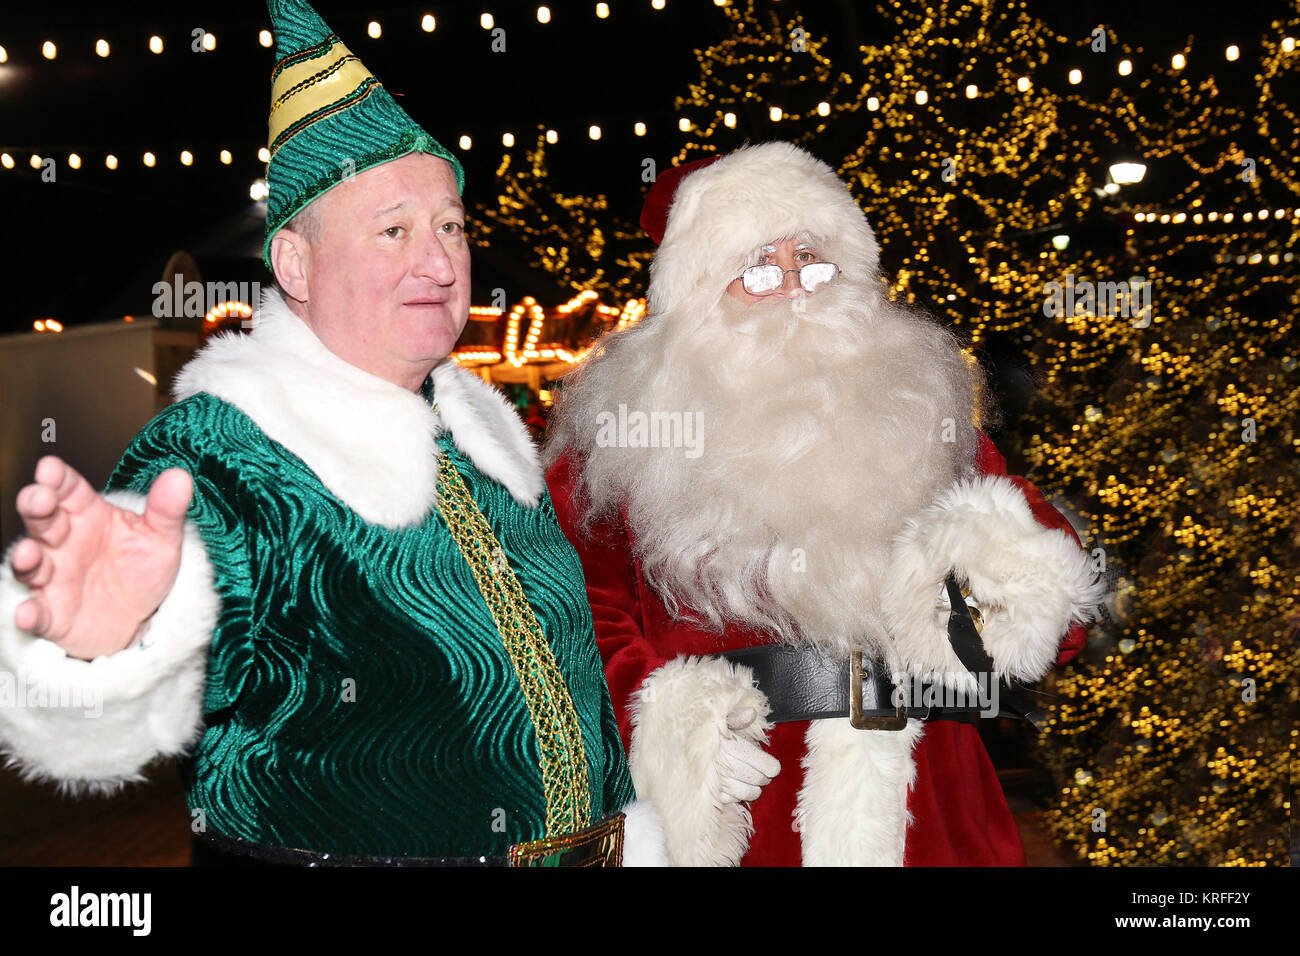 Philadelphia, PA, USA. 19th Dec, 2017. Mayor James Kenney, pictured as Buddy the Elf and City Councilman Mark Squilla pictured as Santa Claus greet visitors at the Franklin Square Electrical Spectacle in Philadelphia, Pa on December 19, 2017 Credit: Star Shooter/Media Punch/Alamy Live News Stock Photo